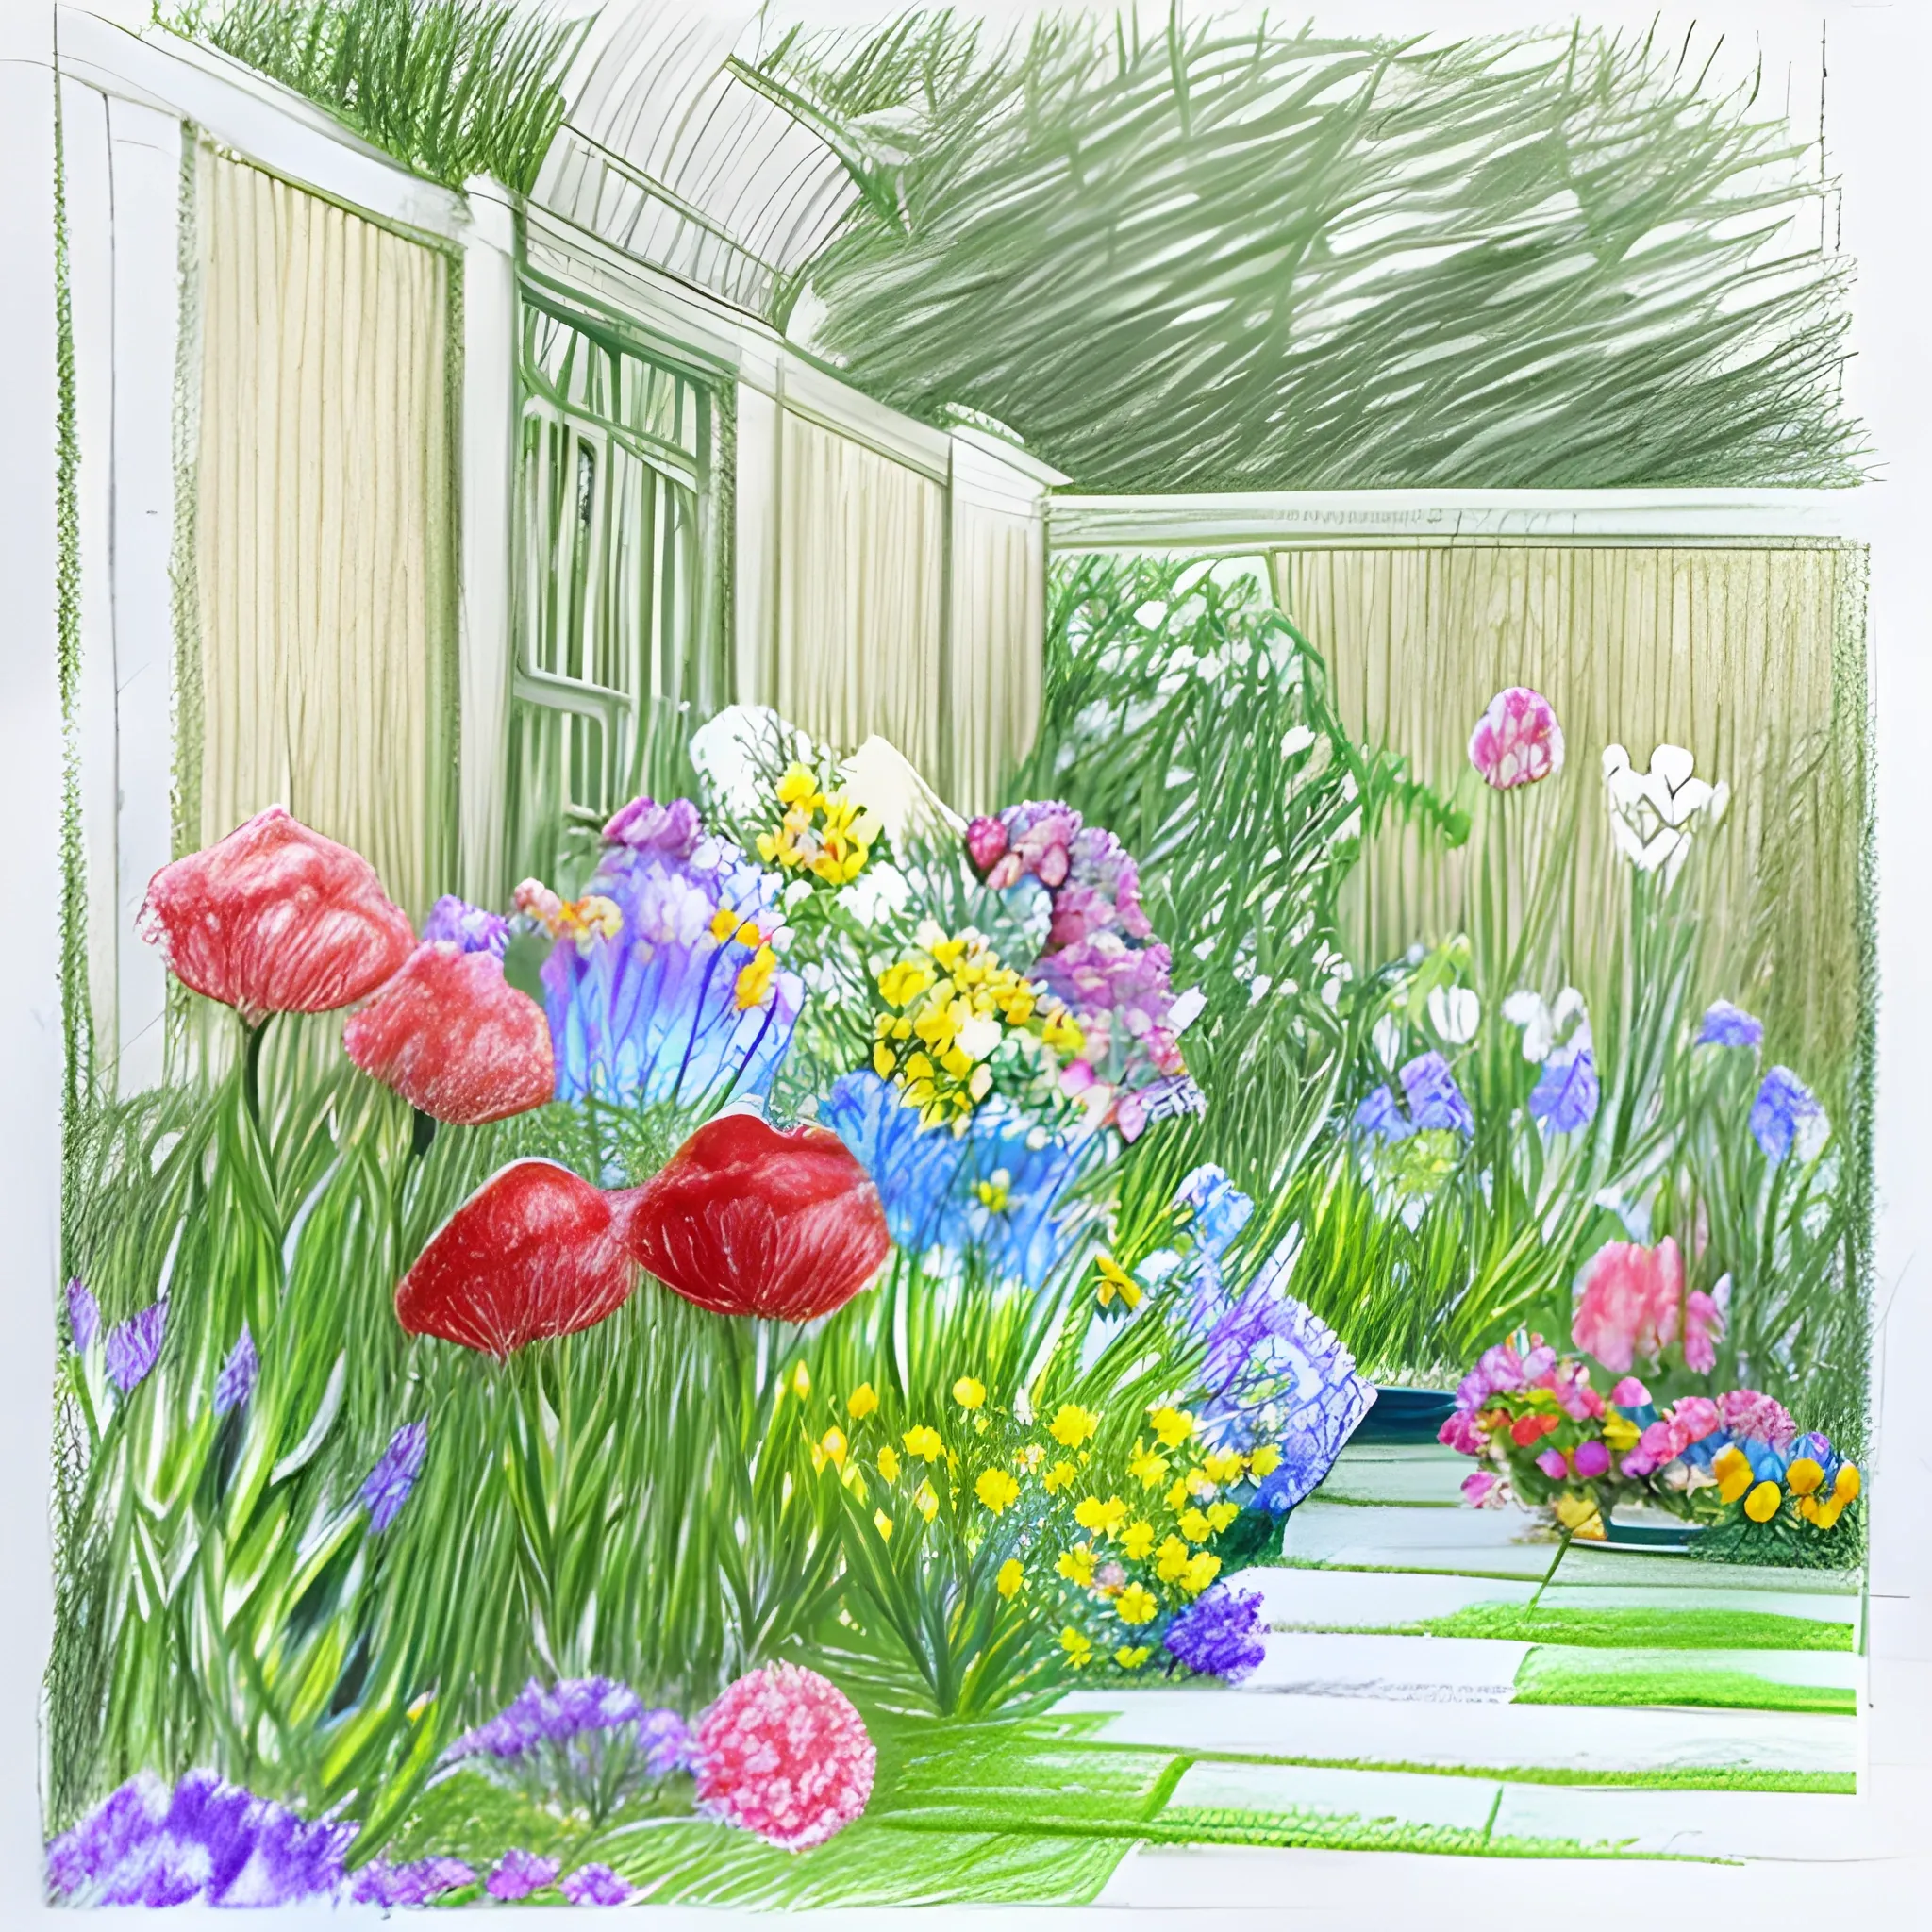 flowers and plants in a garden , Pencil Sketch